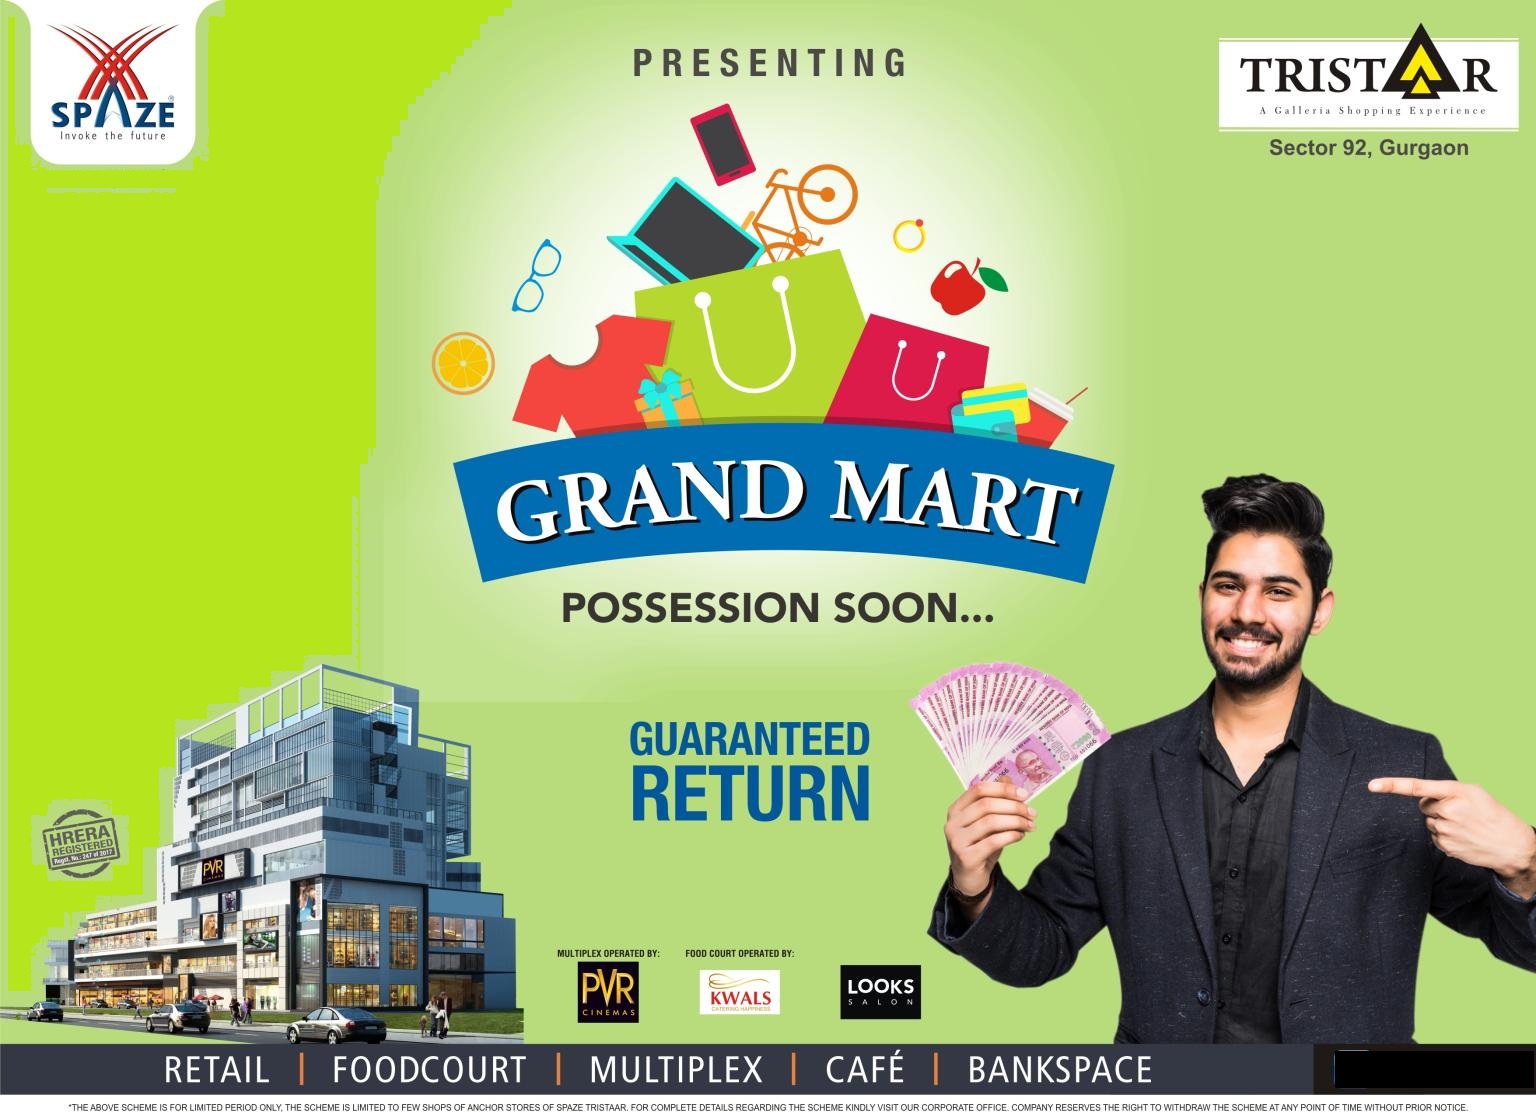 Grand mart possession soon at Spaze Tristaar, Gurgaon Update